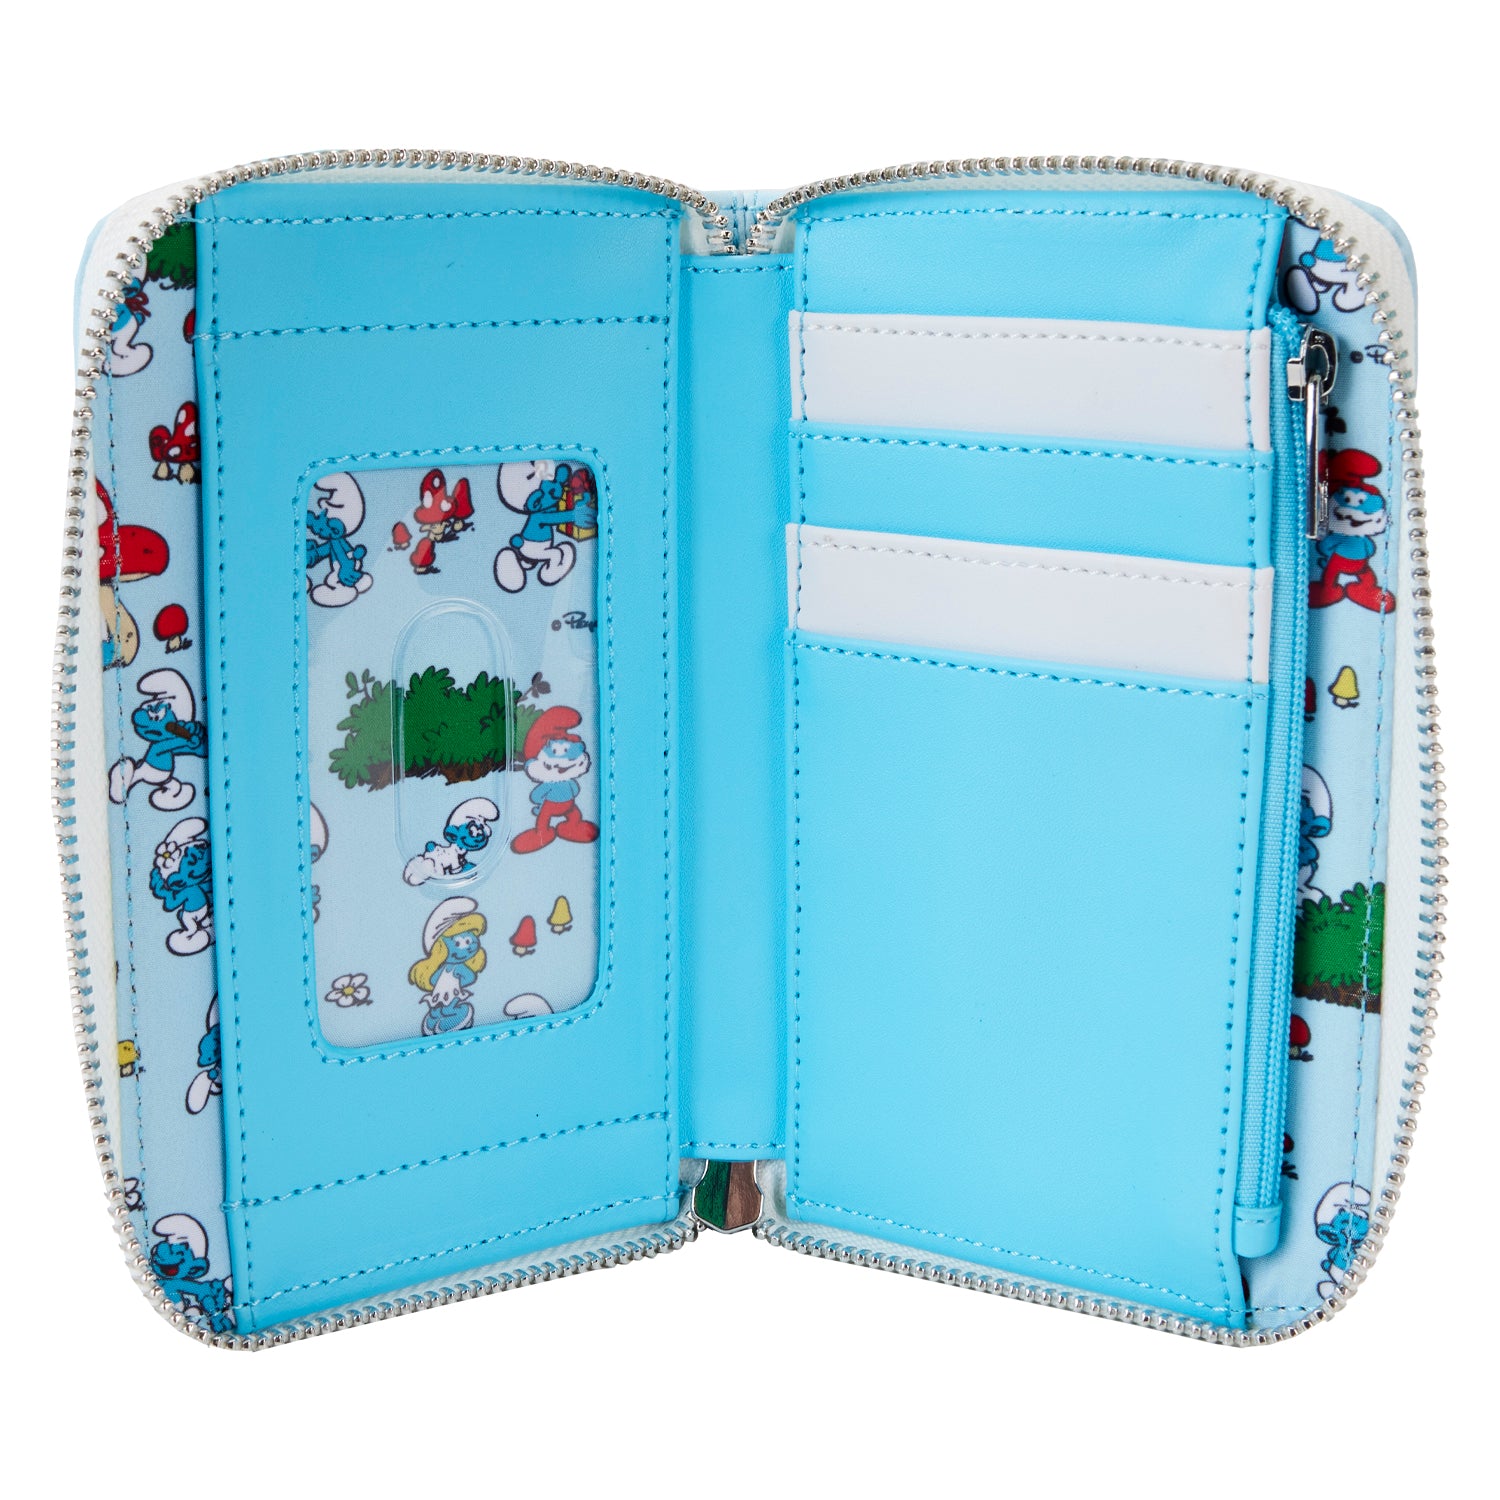 Loungefly x The Smurfs Smurfette Cosplay Wallet